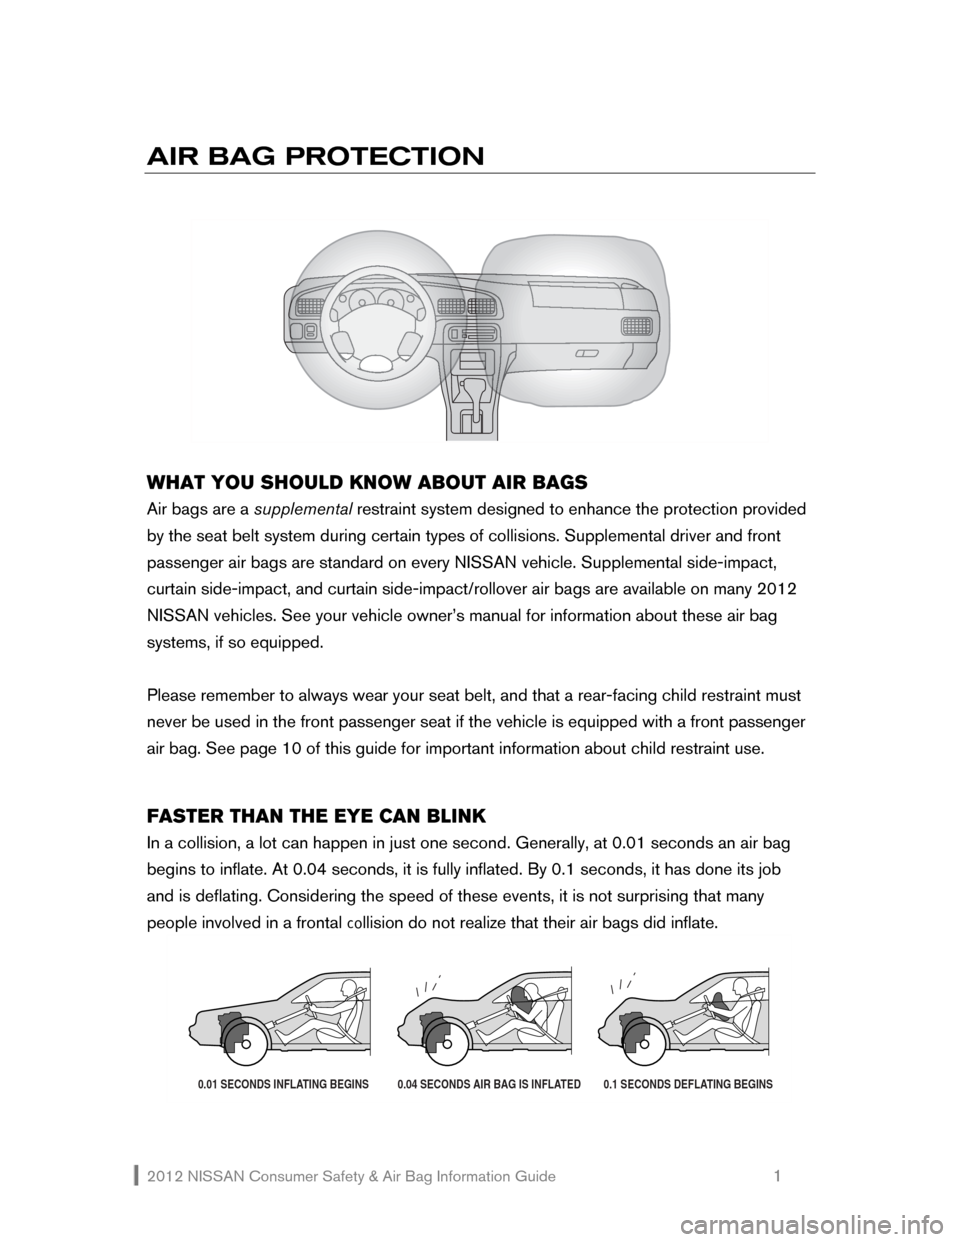 NISSAN 370Z ROADSTER 2012 Z34 Consumer Safety Air Bag Information Guide 2012 NISSAN Consumer Safety & Air Bag Information Guide                                                   1 
AIR BAG PROTECTION 
    
 
 
WHAT YOU SHOULD KNOW ABOUT AIR BAGS 
Air bags are a supplement